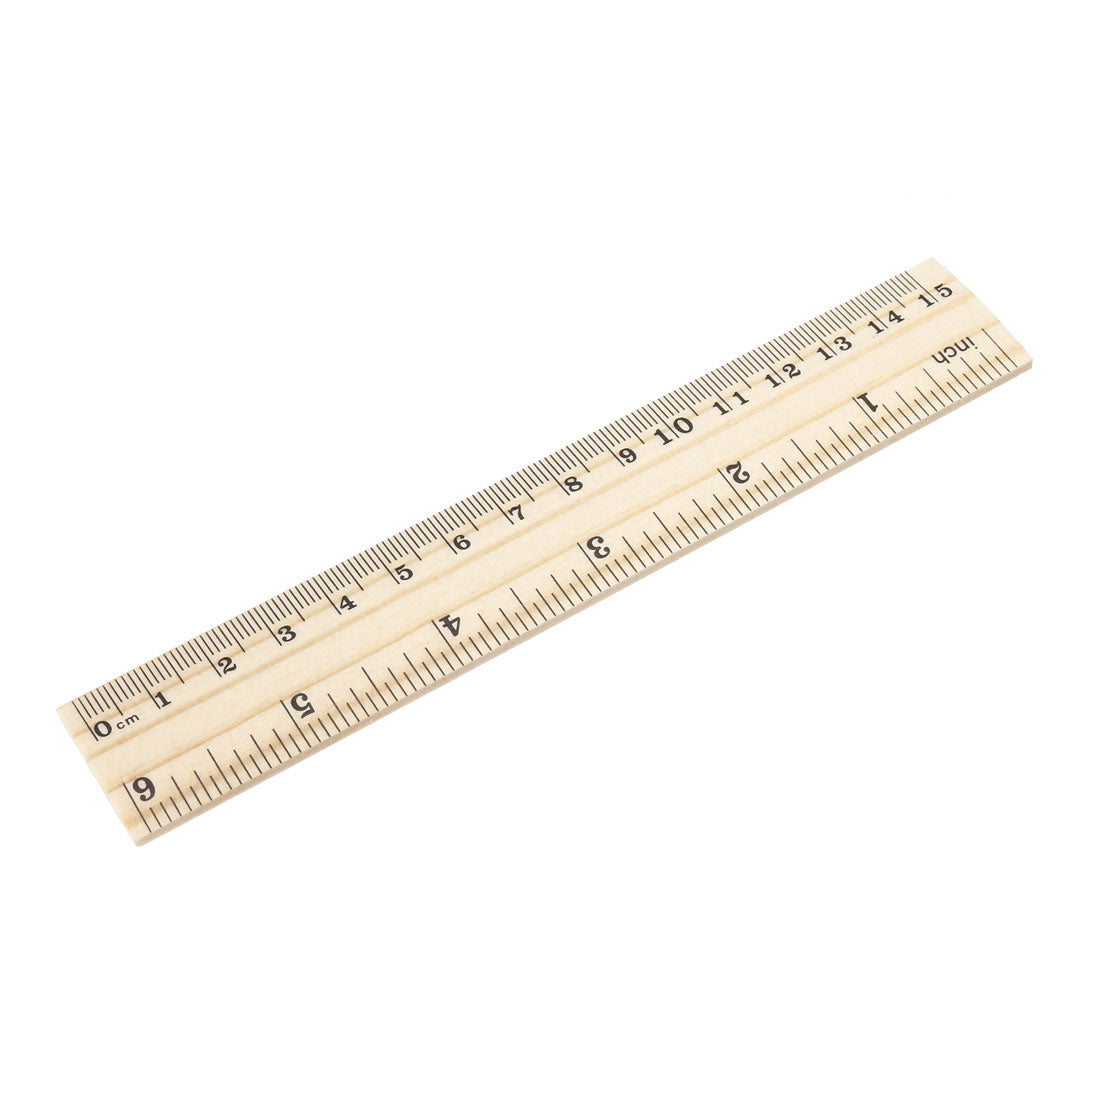 uxcell Uxcell Wood Ruler 15cm 6 Inch 2 Scale Office Rulers Wooden Straight Rulers Measuring Ruler 10pcs